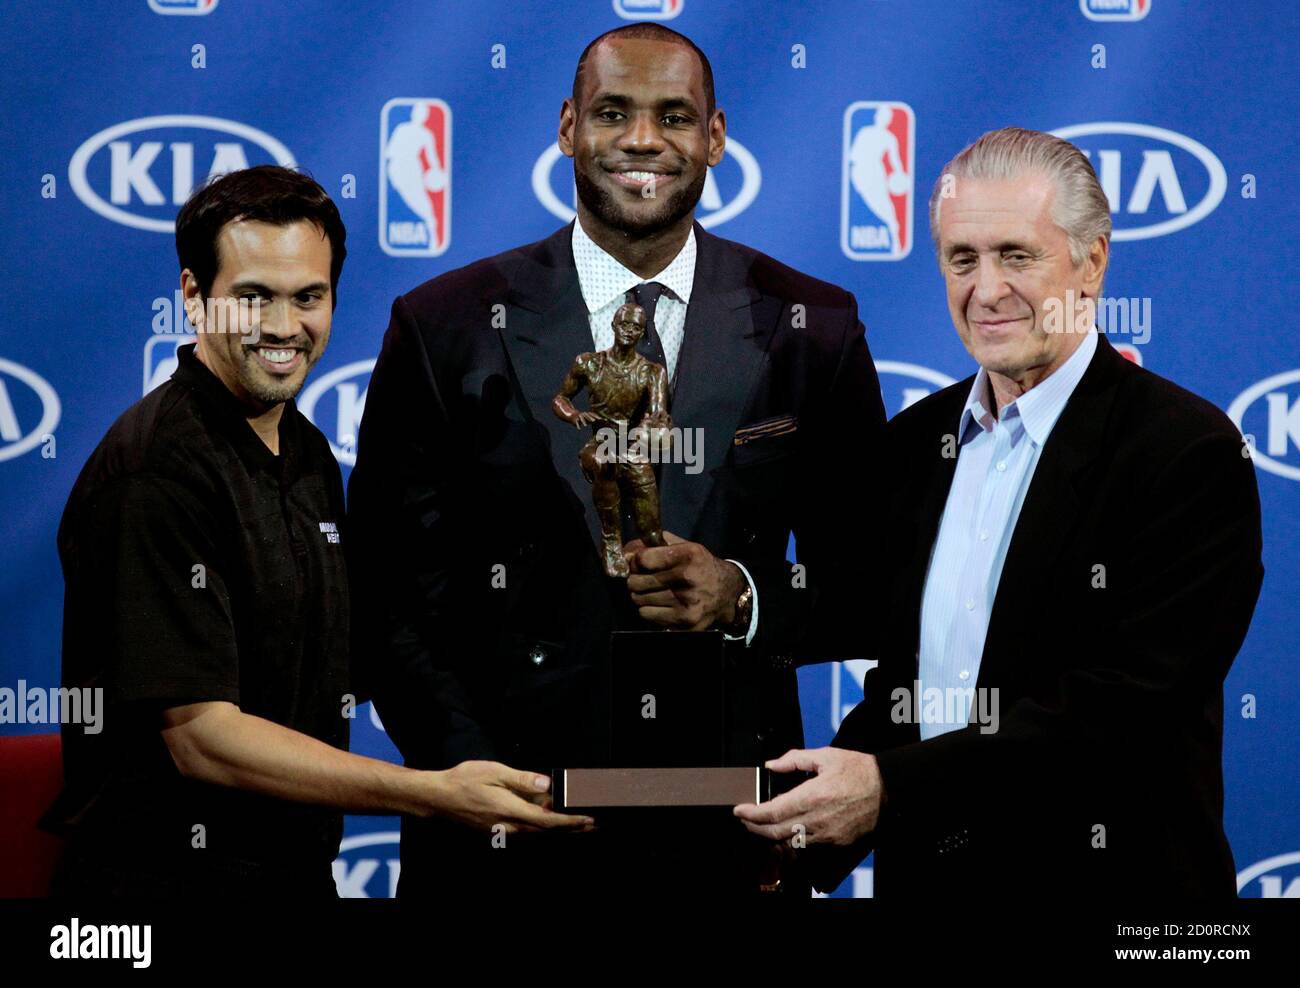 Miami Heat forward LeBron James (C) holds the trophy as he stands with head  coach Erik Spoelstra (L) and team president Pat Riley, after being named NBA  Most Valuable Player at a